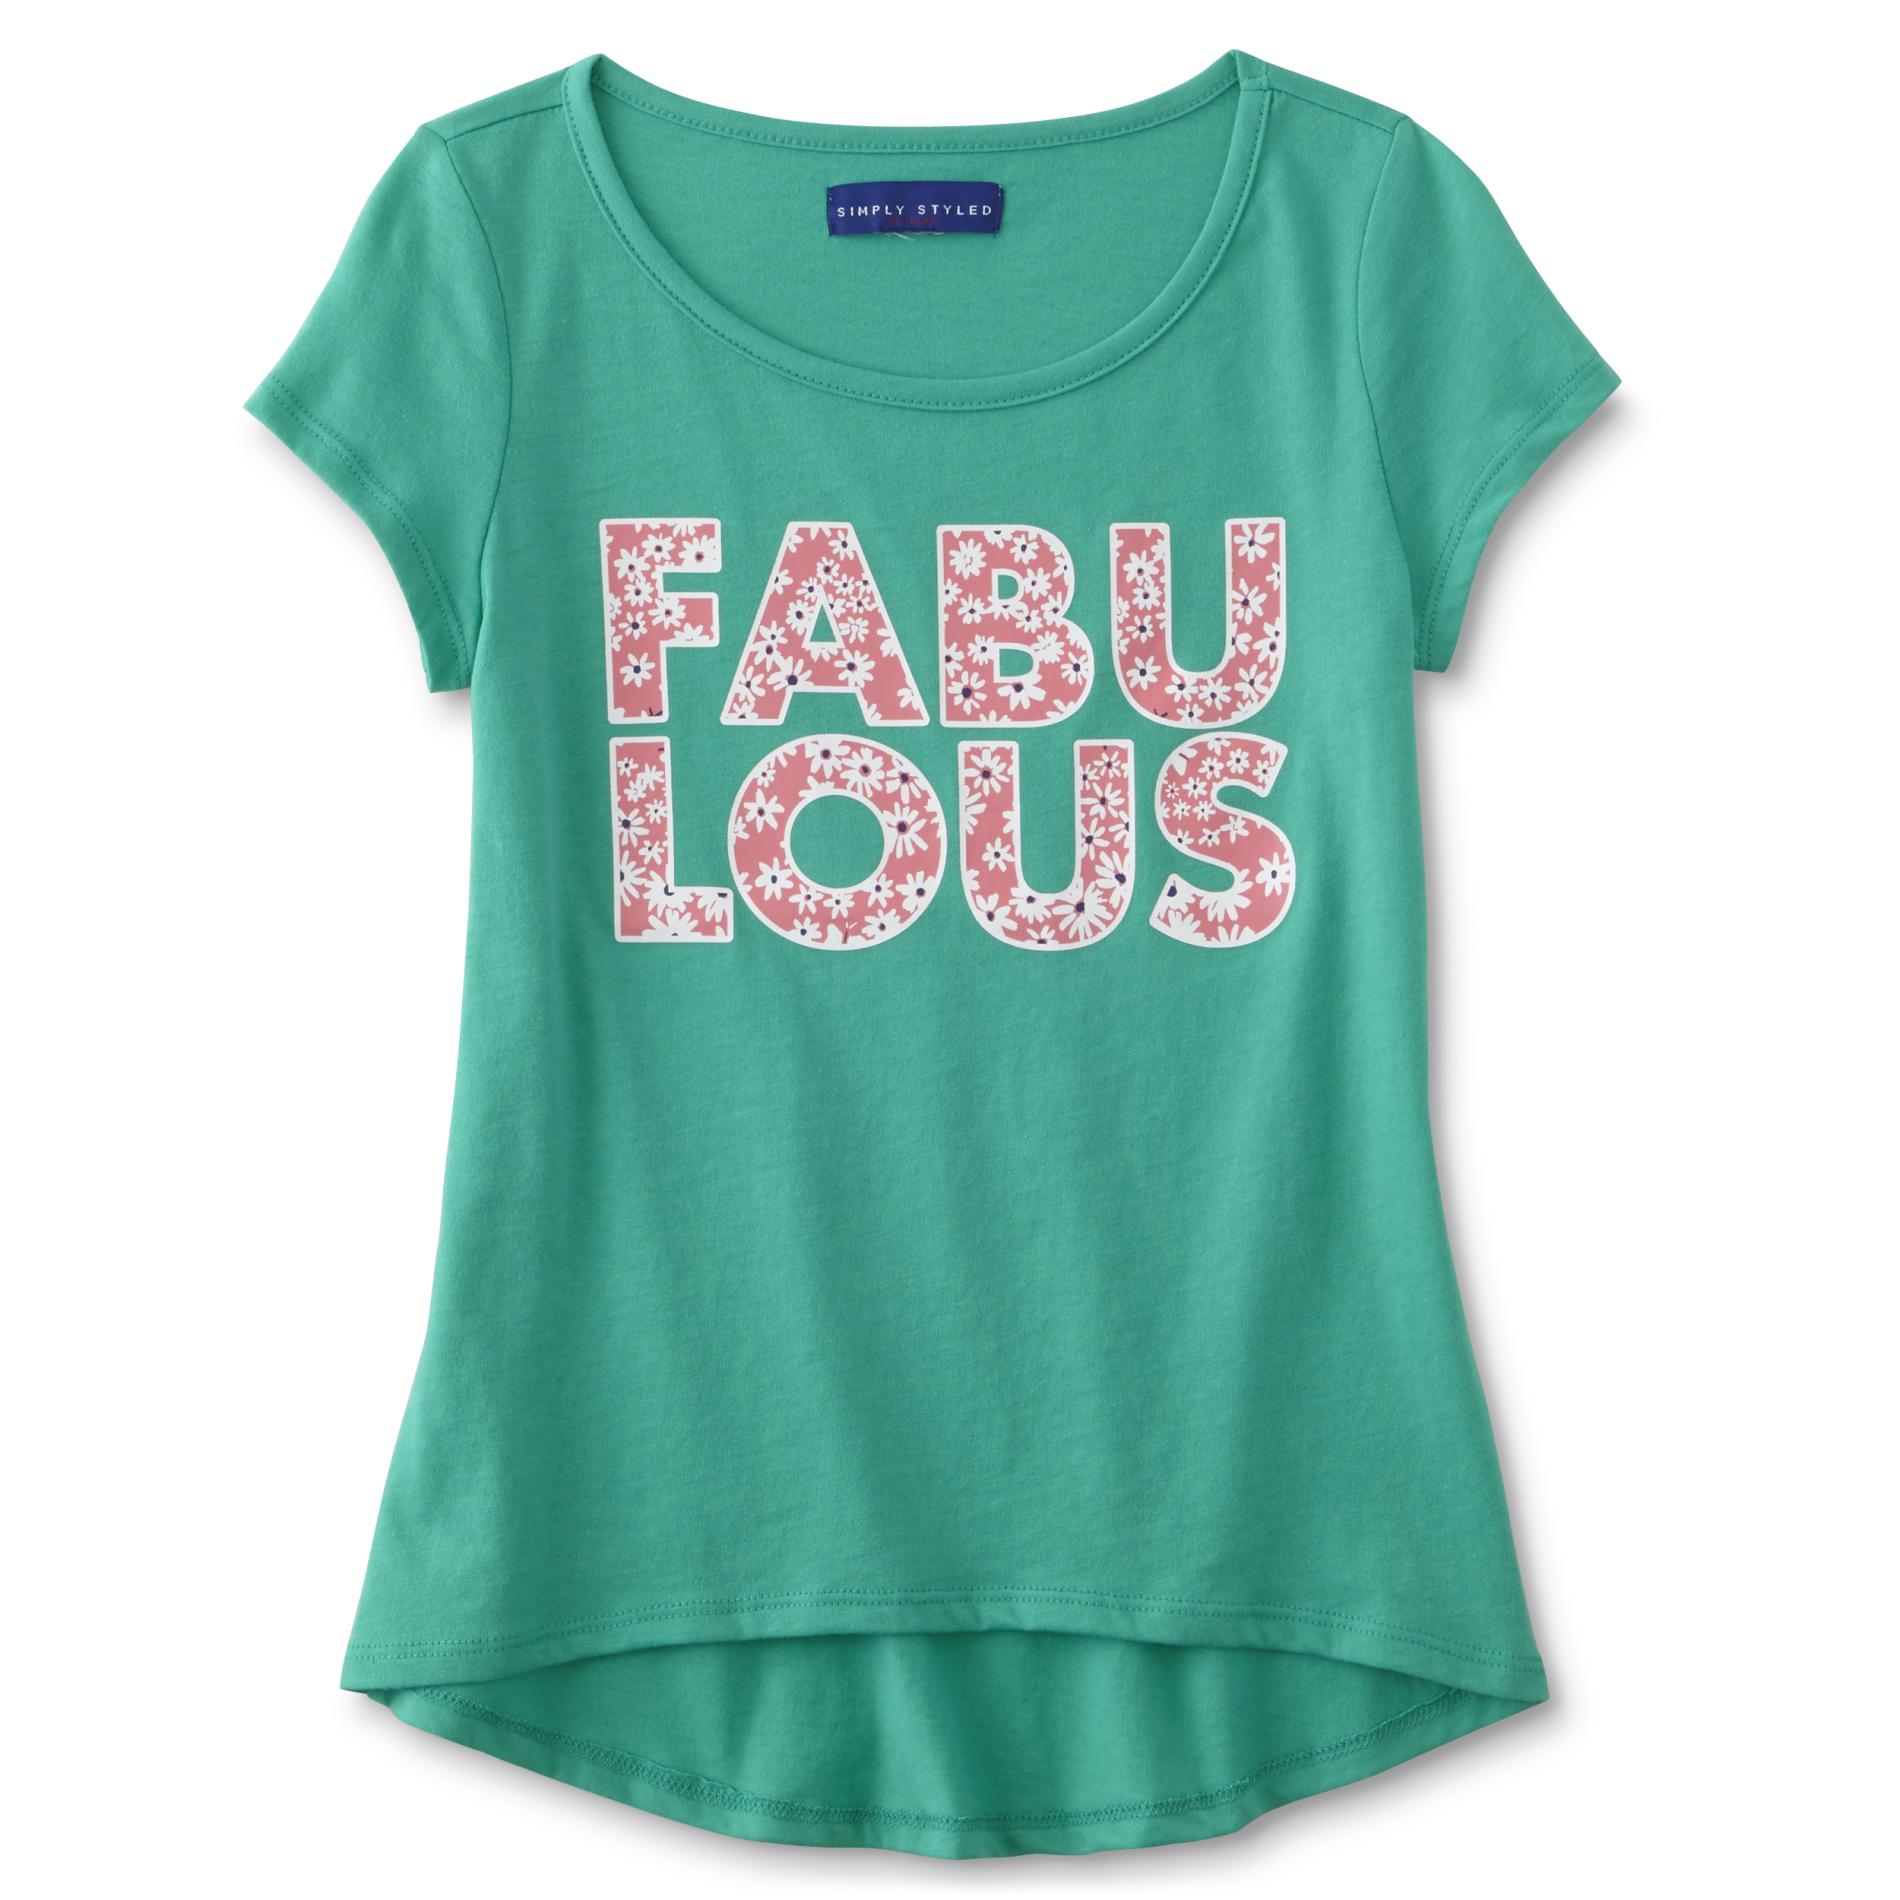 Simply Styled Girls' Graphic T-Shirt - Fabulous